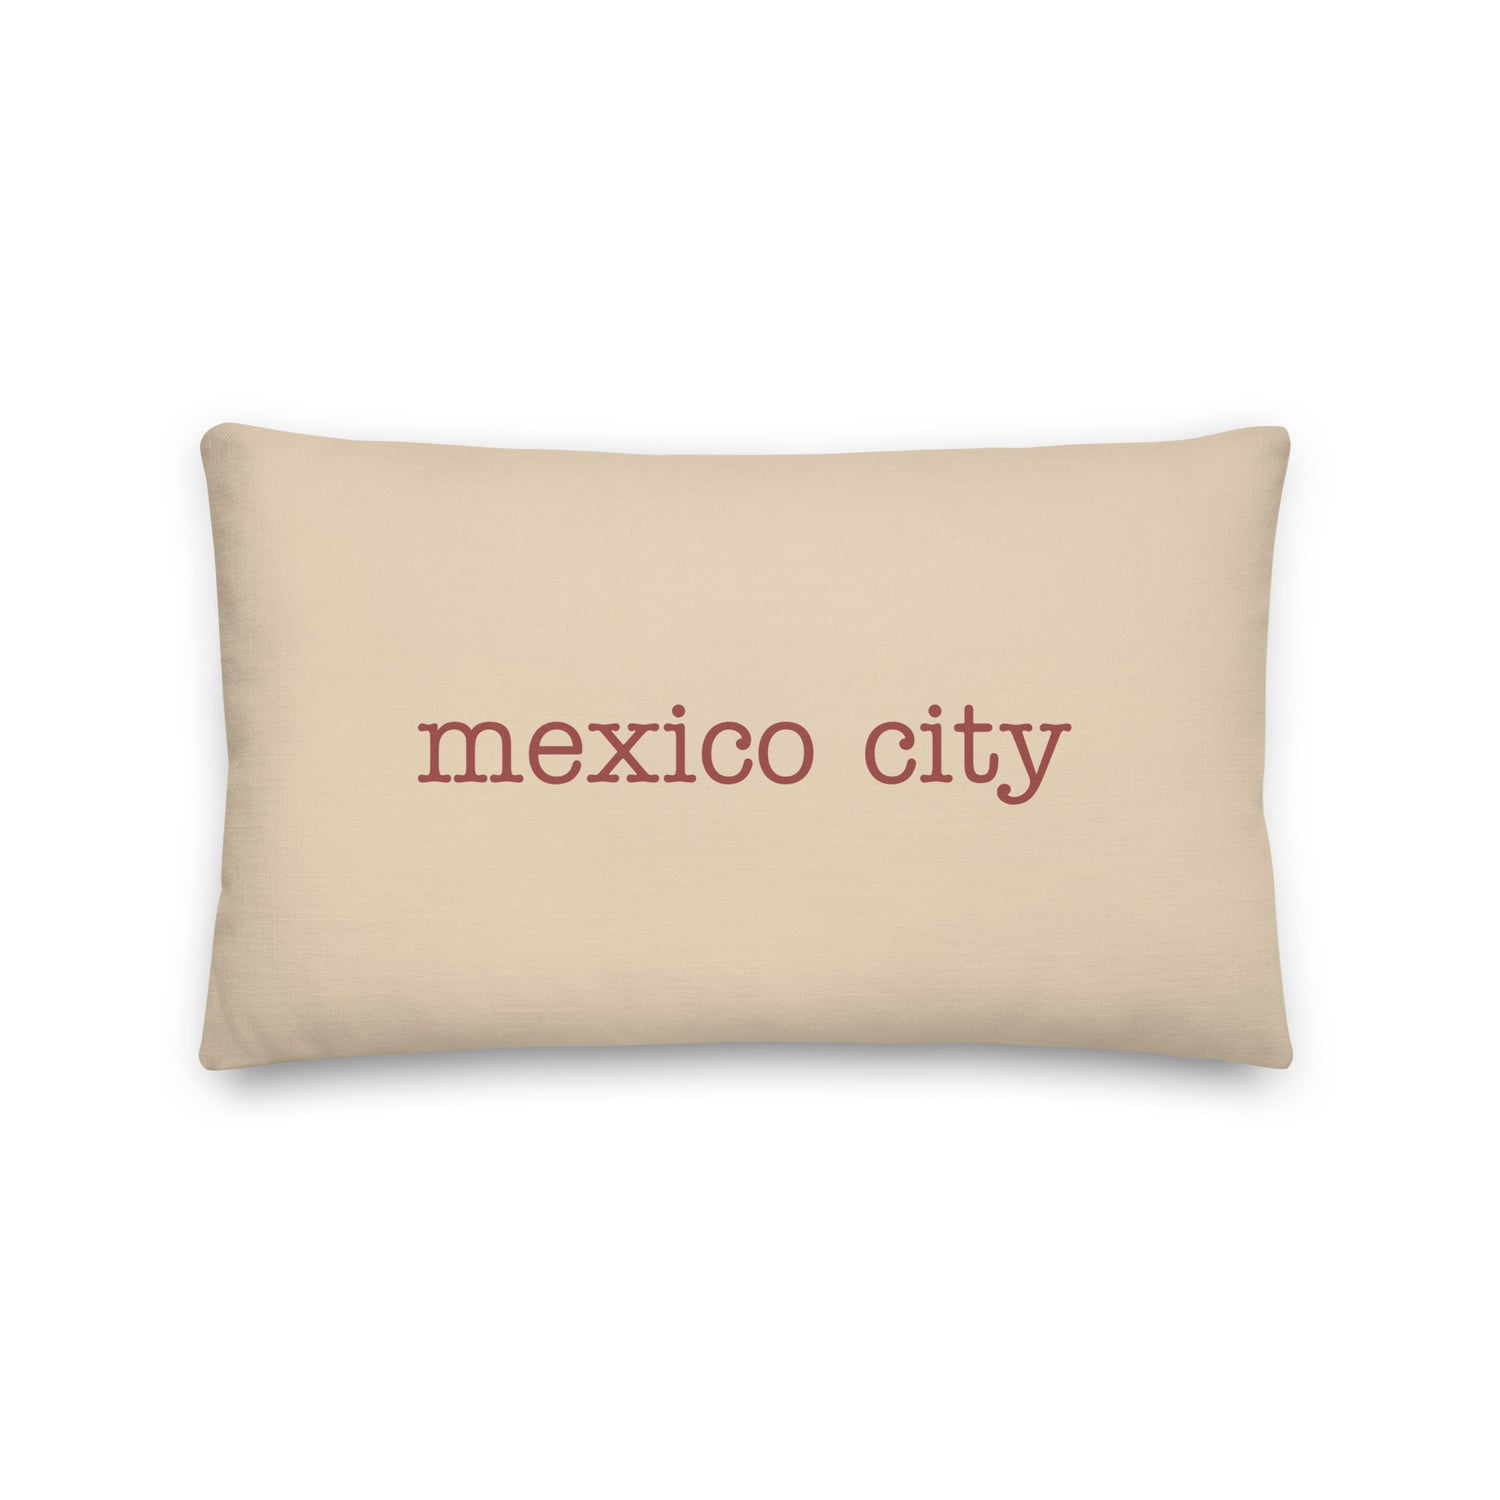 Mexico City Mexico Pillows and Blankets • MEX Airport Code